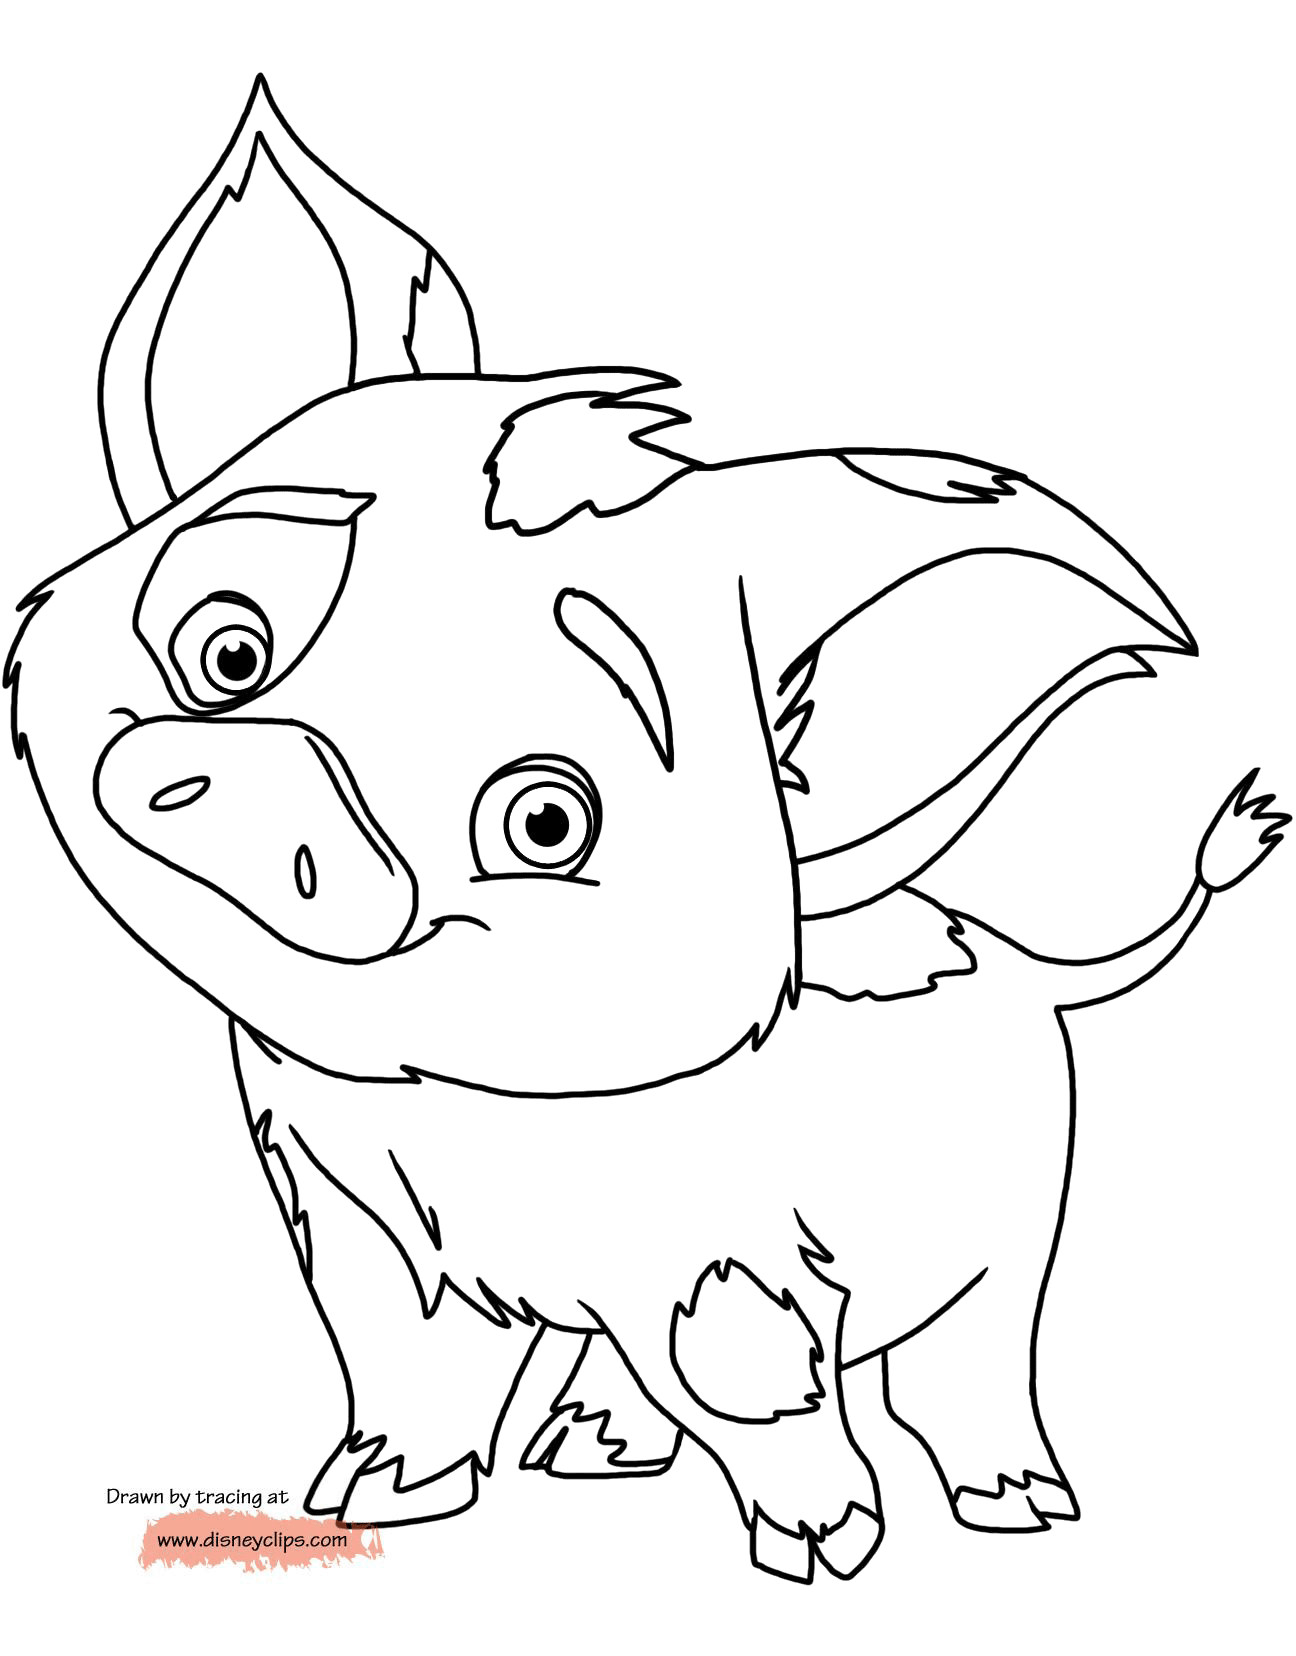 Moana Coloring Pages Printable
 Disney s Moana Coloring Pages